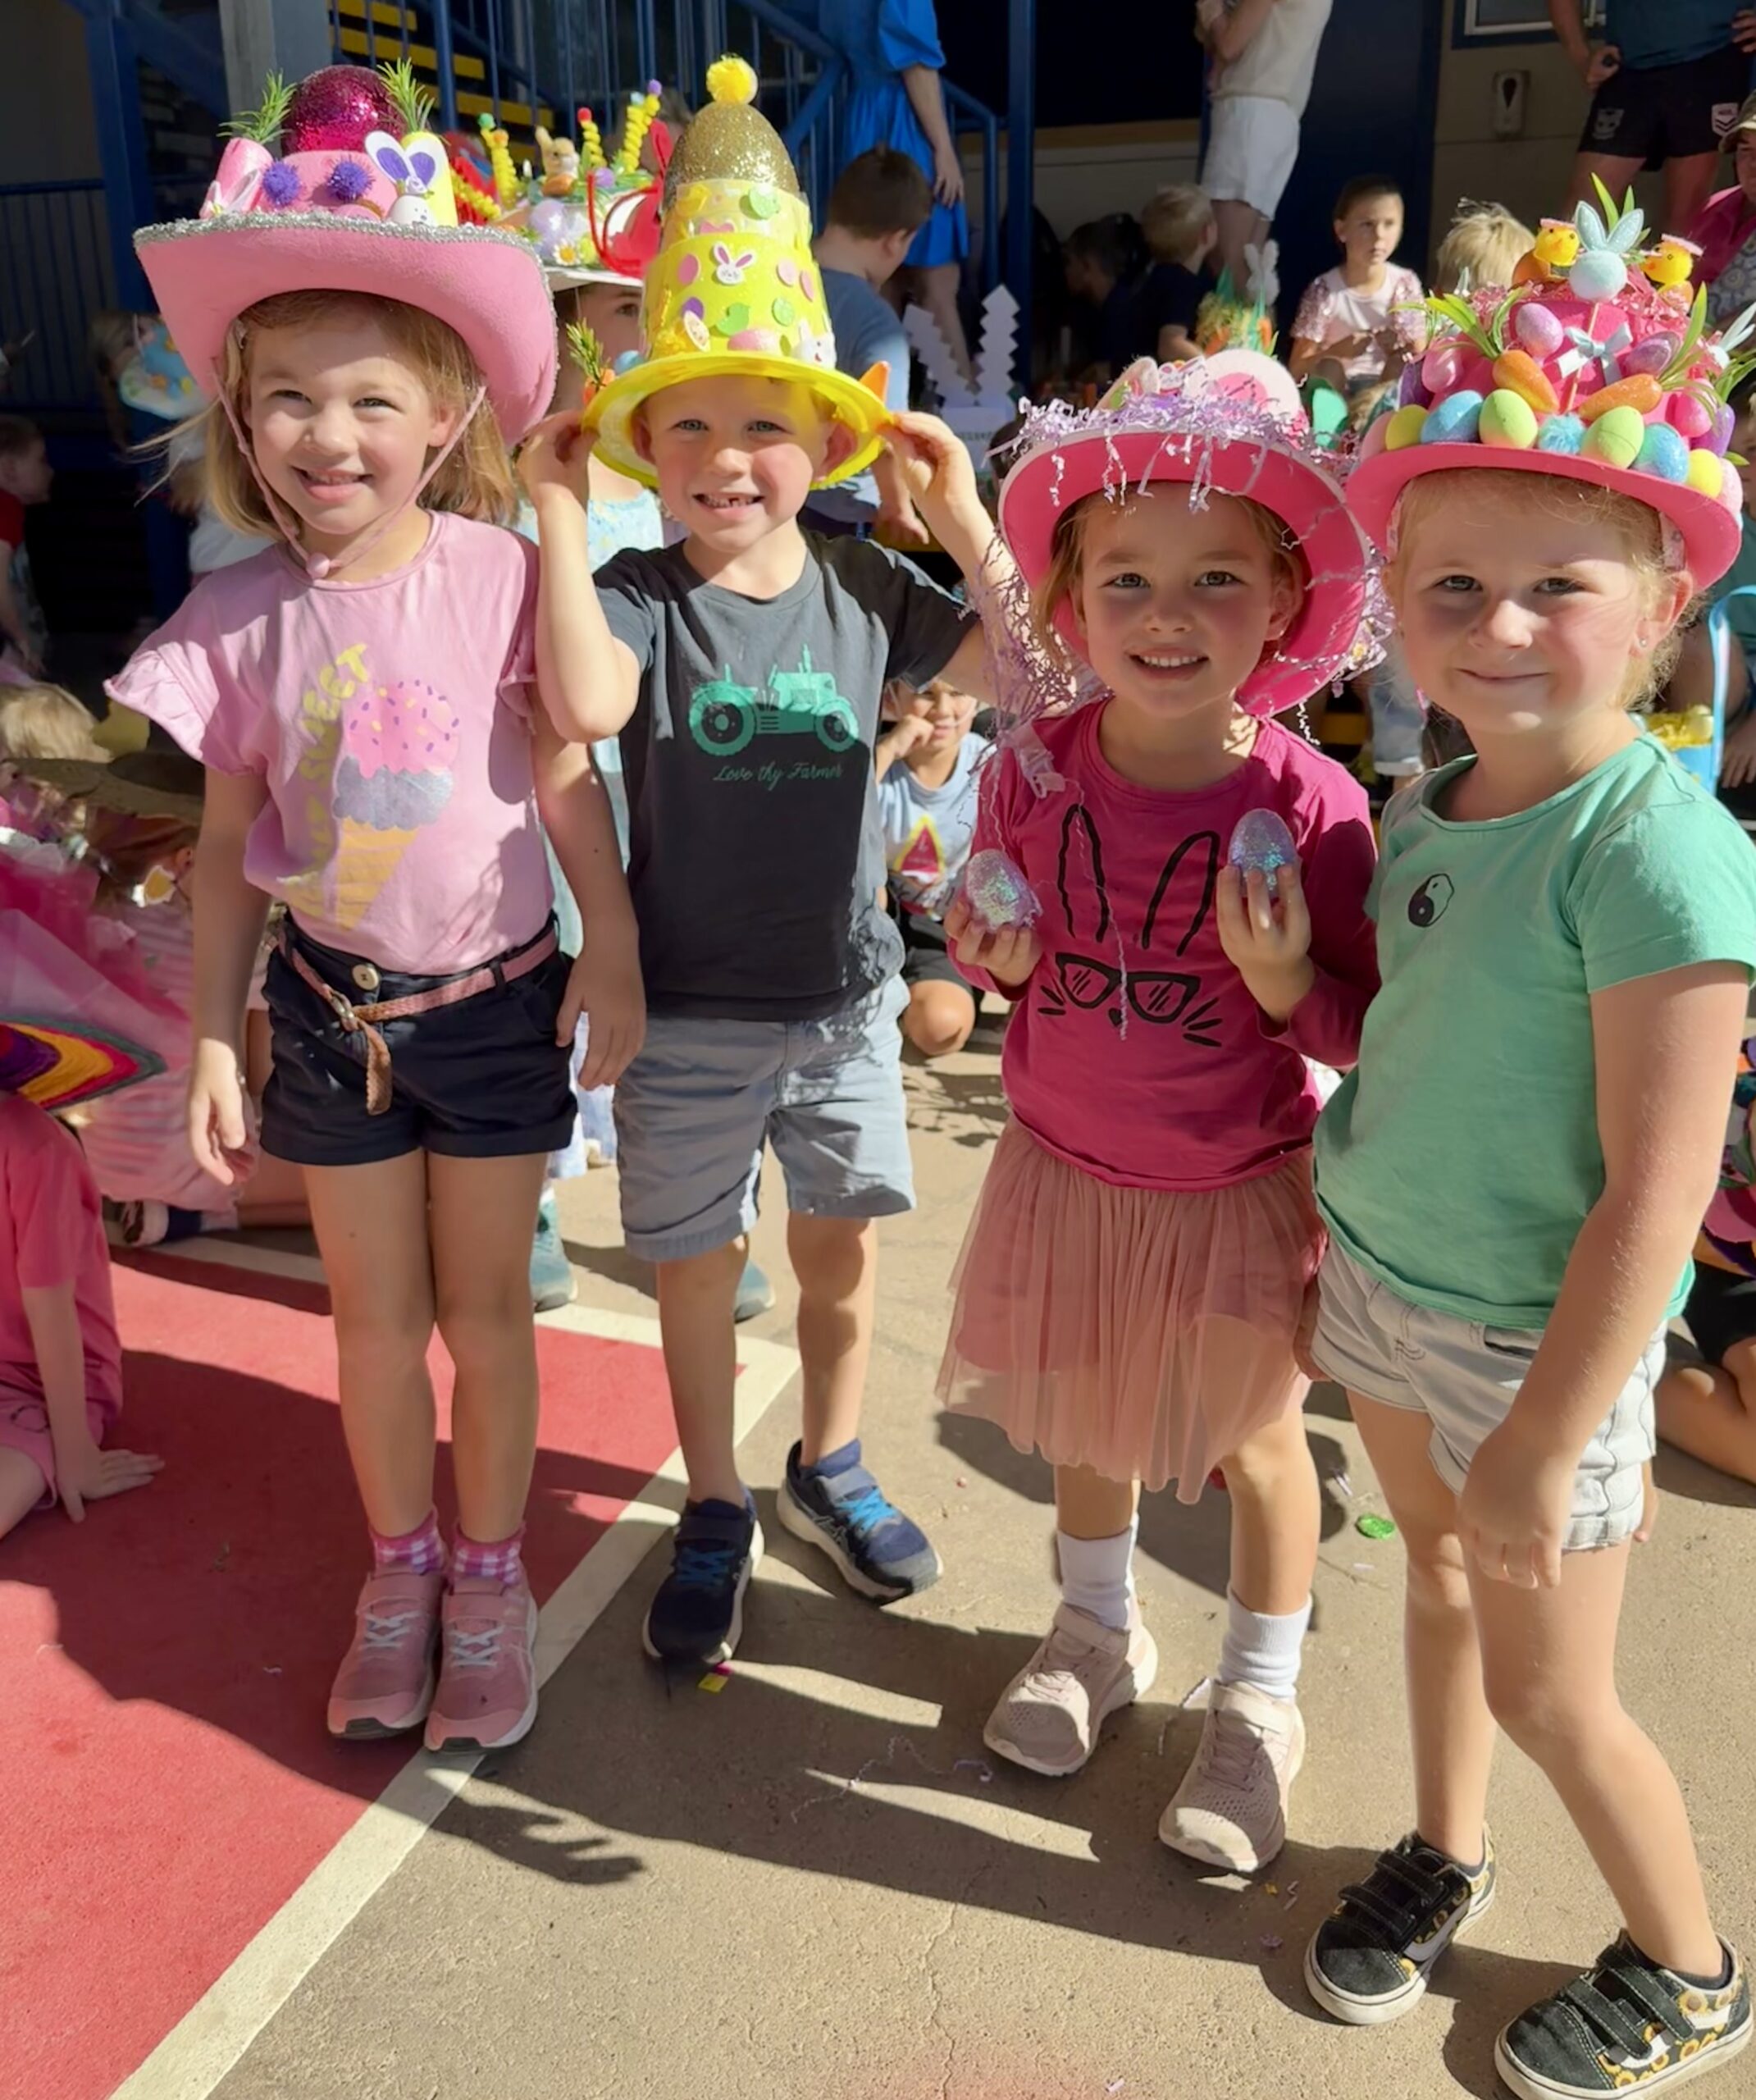 Hats off to ‘Eggscellent’ Easter celebrations | Gallery